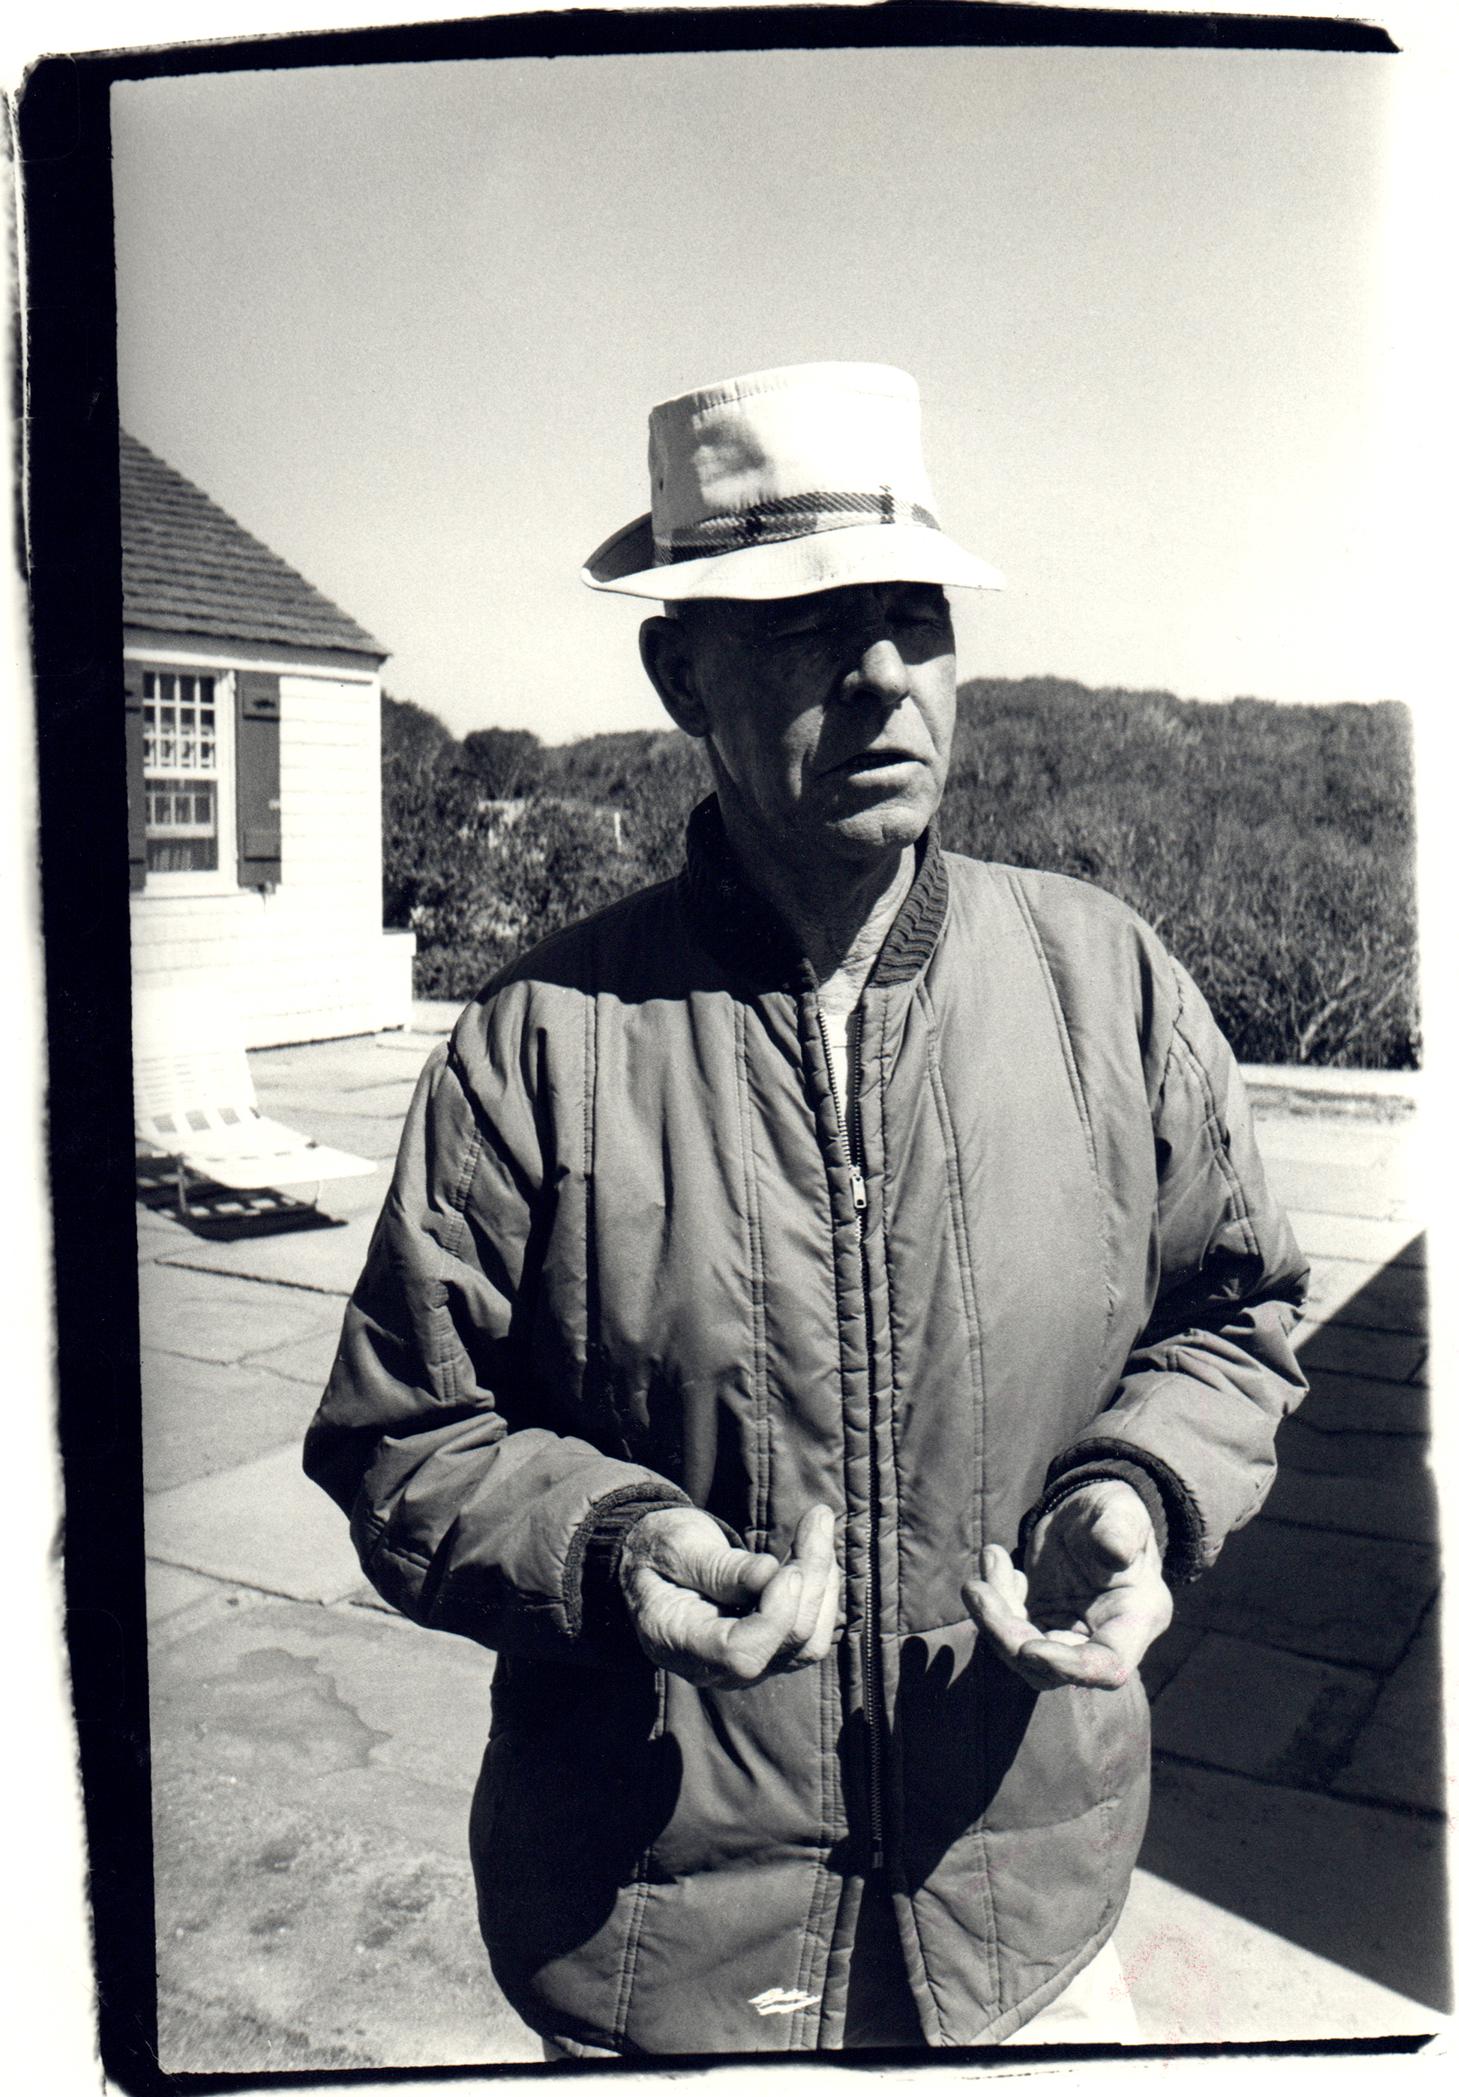 Andy Warhol Black and White Photograph - Mr. Winters, the Caretaker of the Montauk Estate